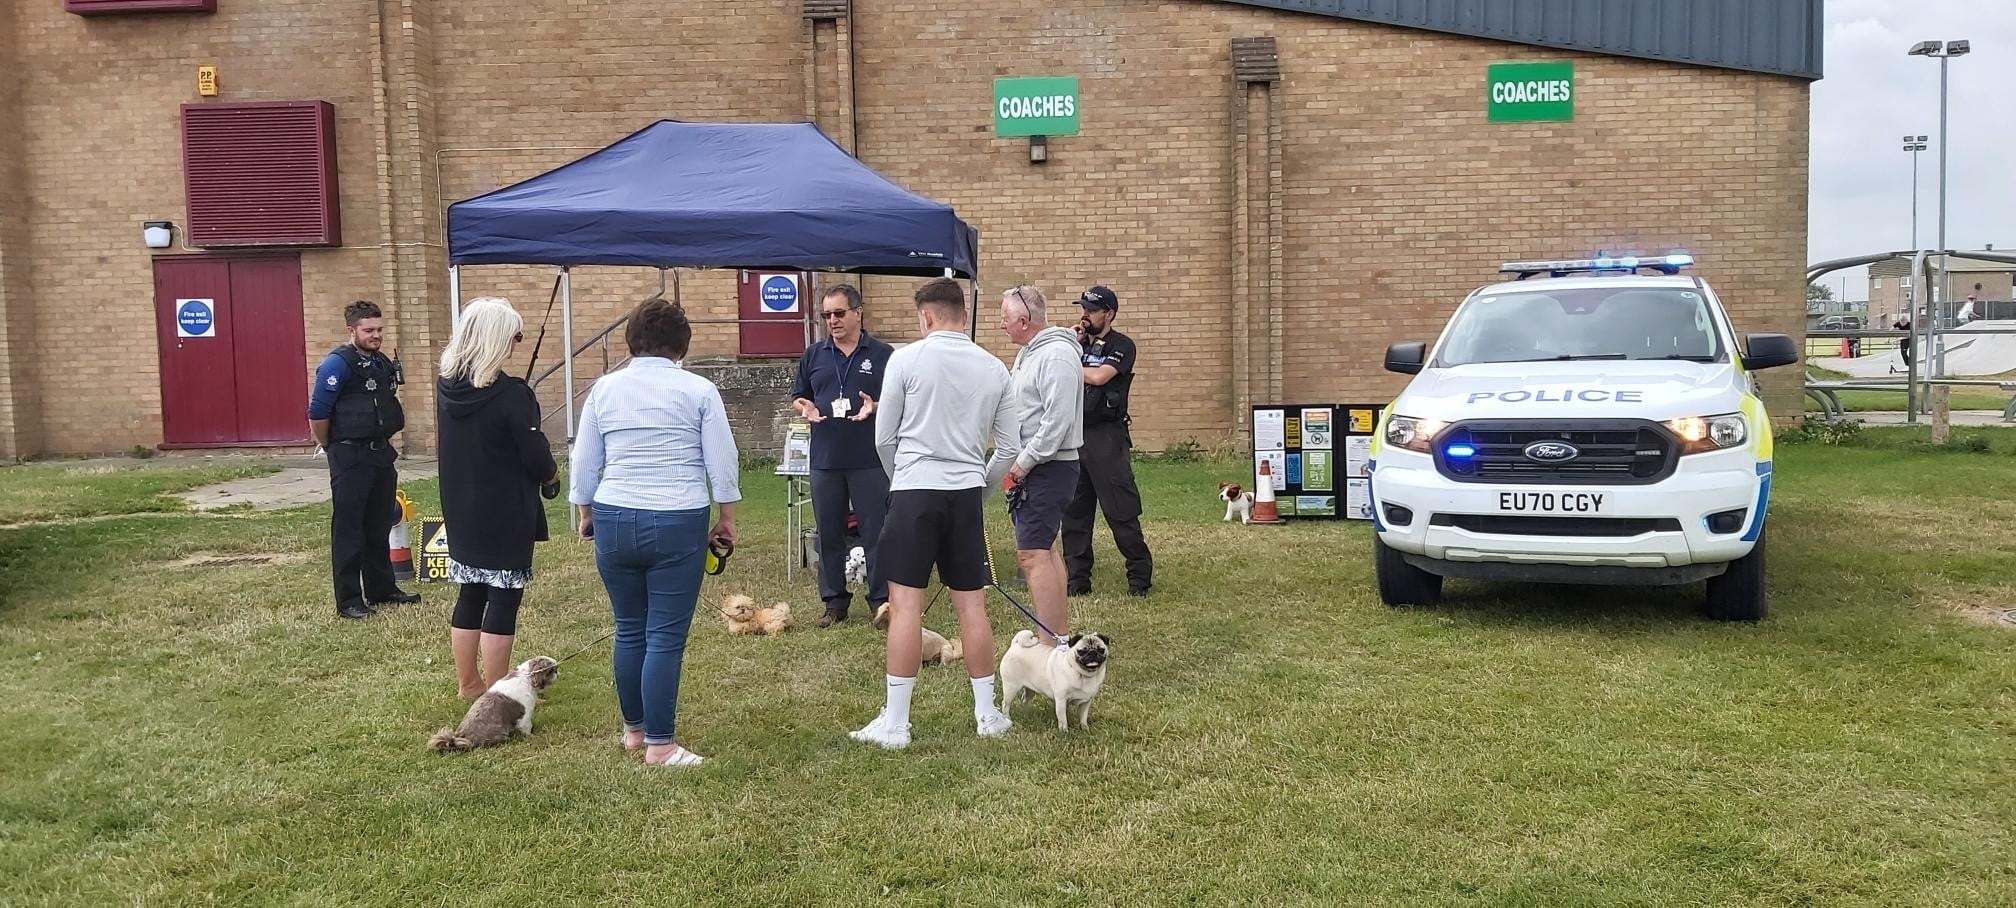 Dog advice - officers on hand at the dog advice event in Dovercourt 